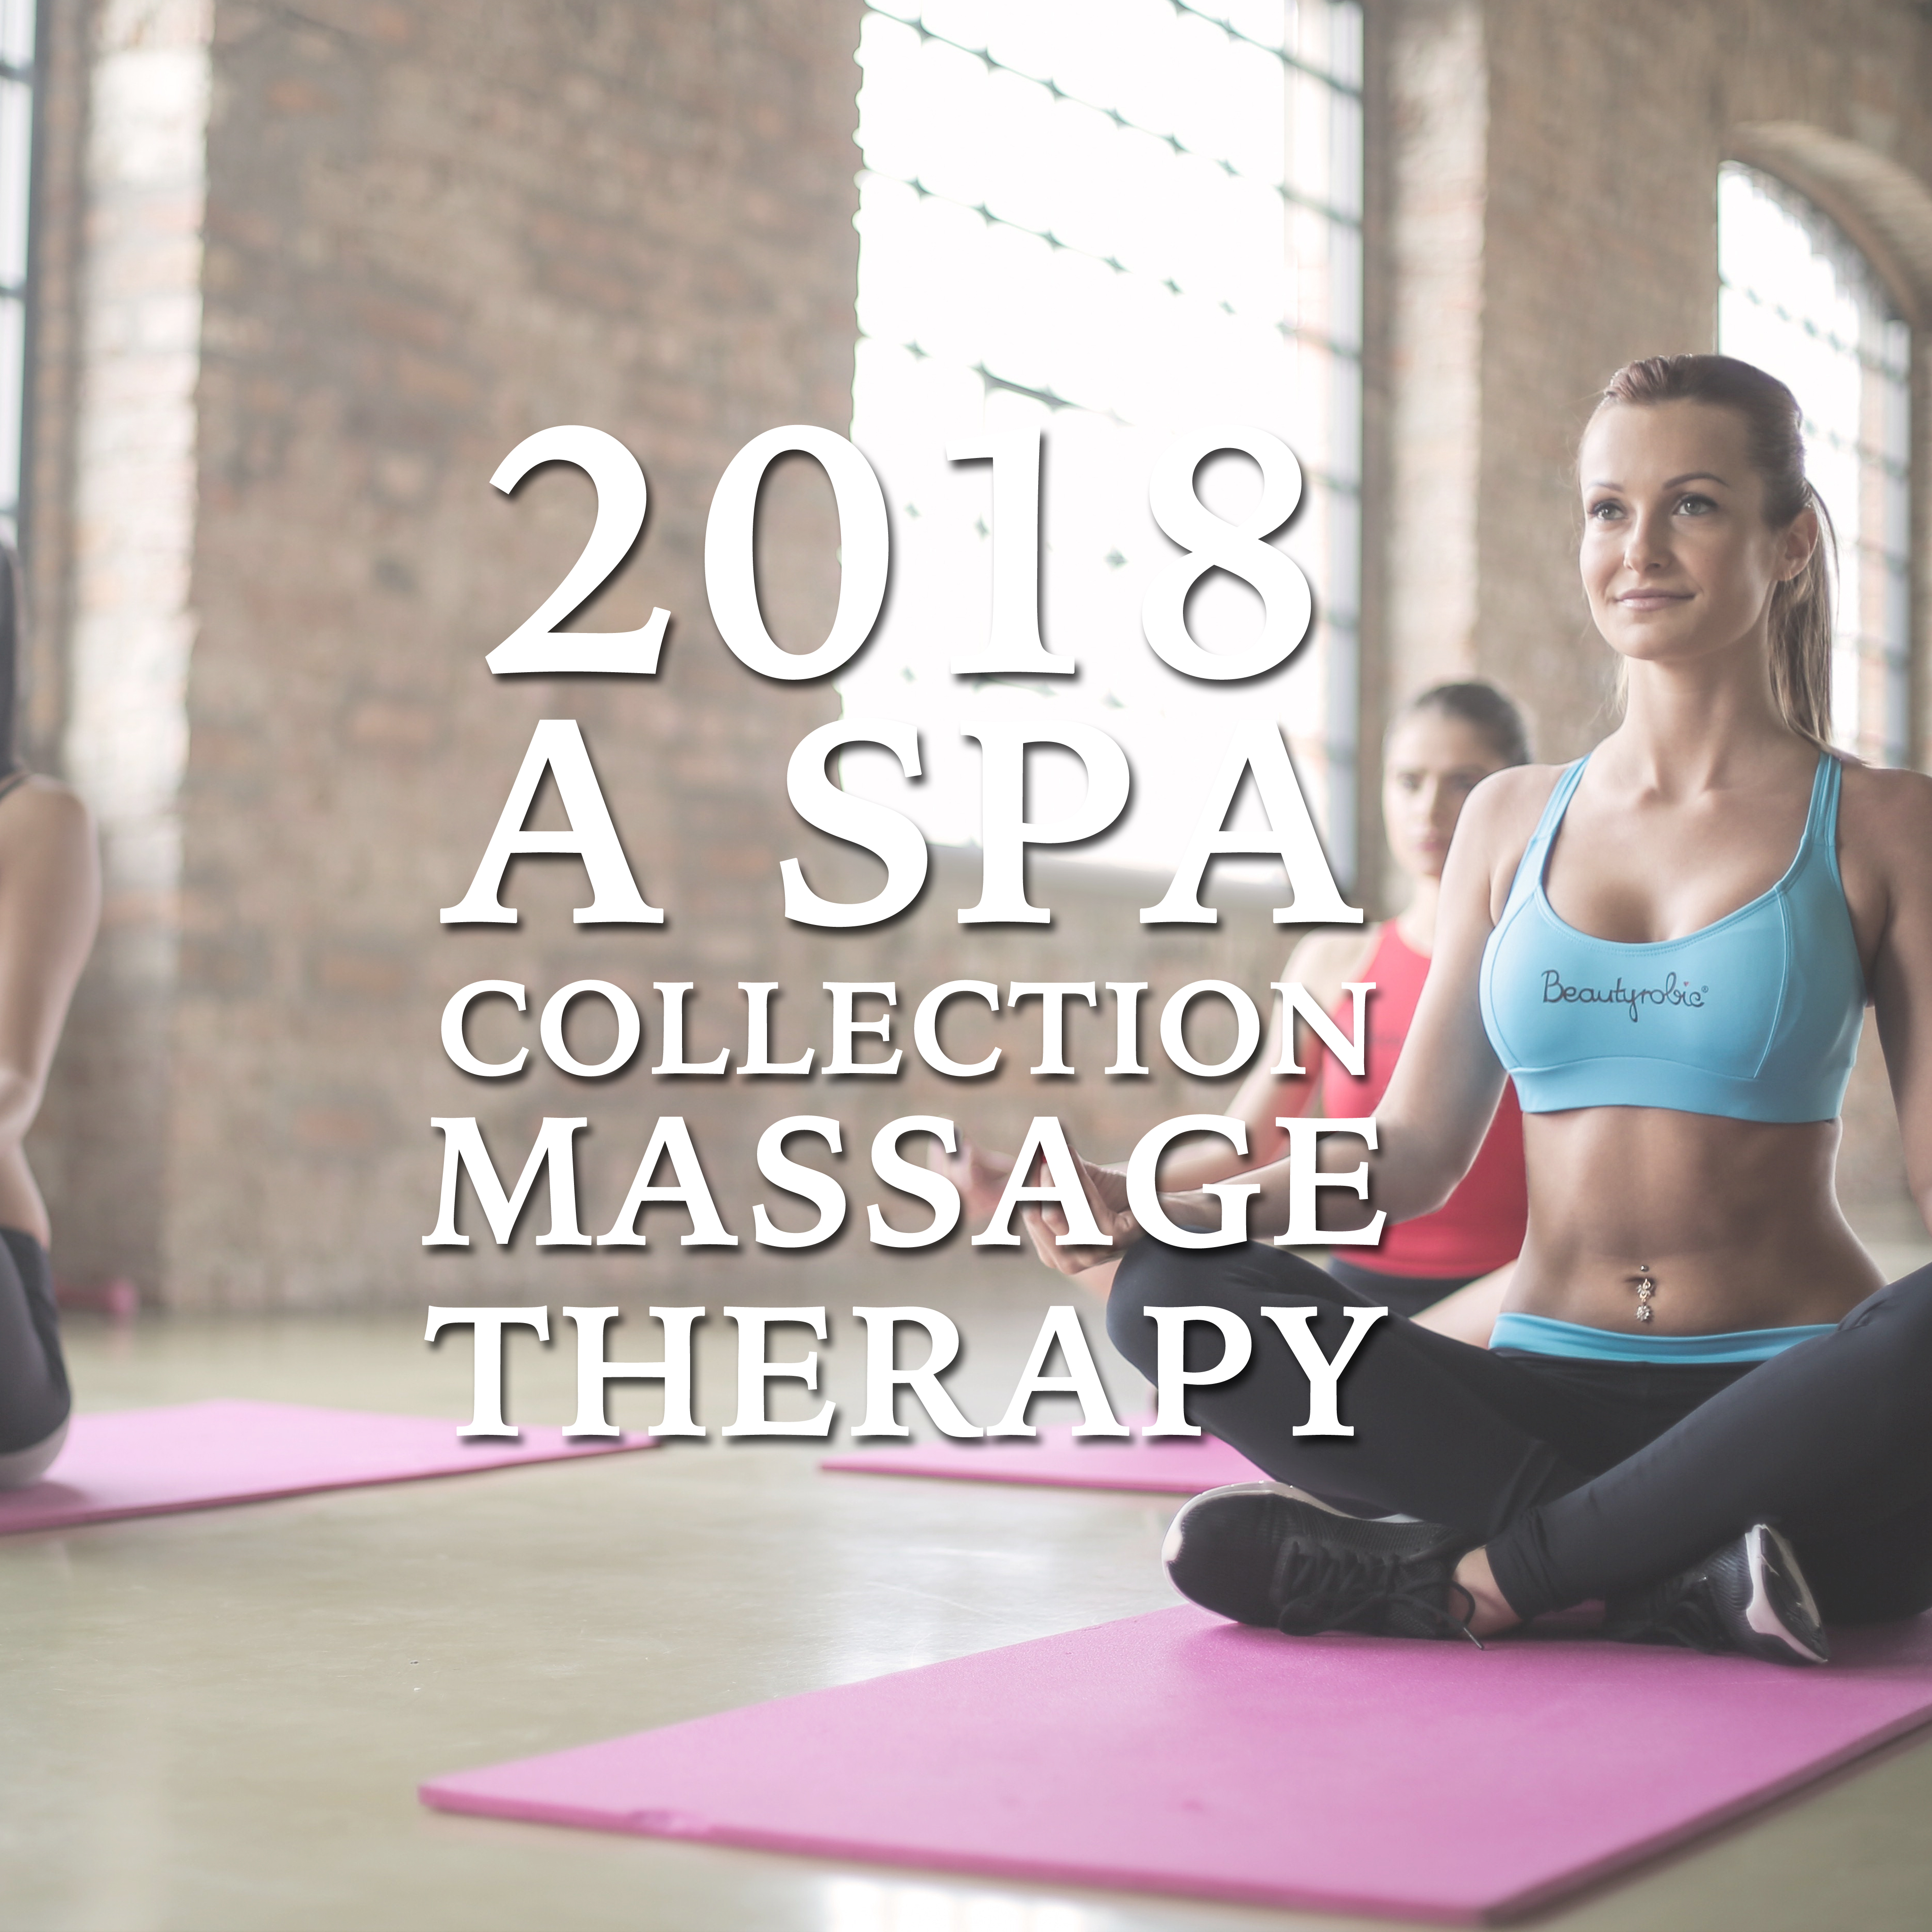 2018 A Spa Collection: Massage Therapy